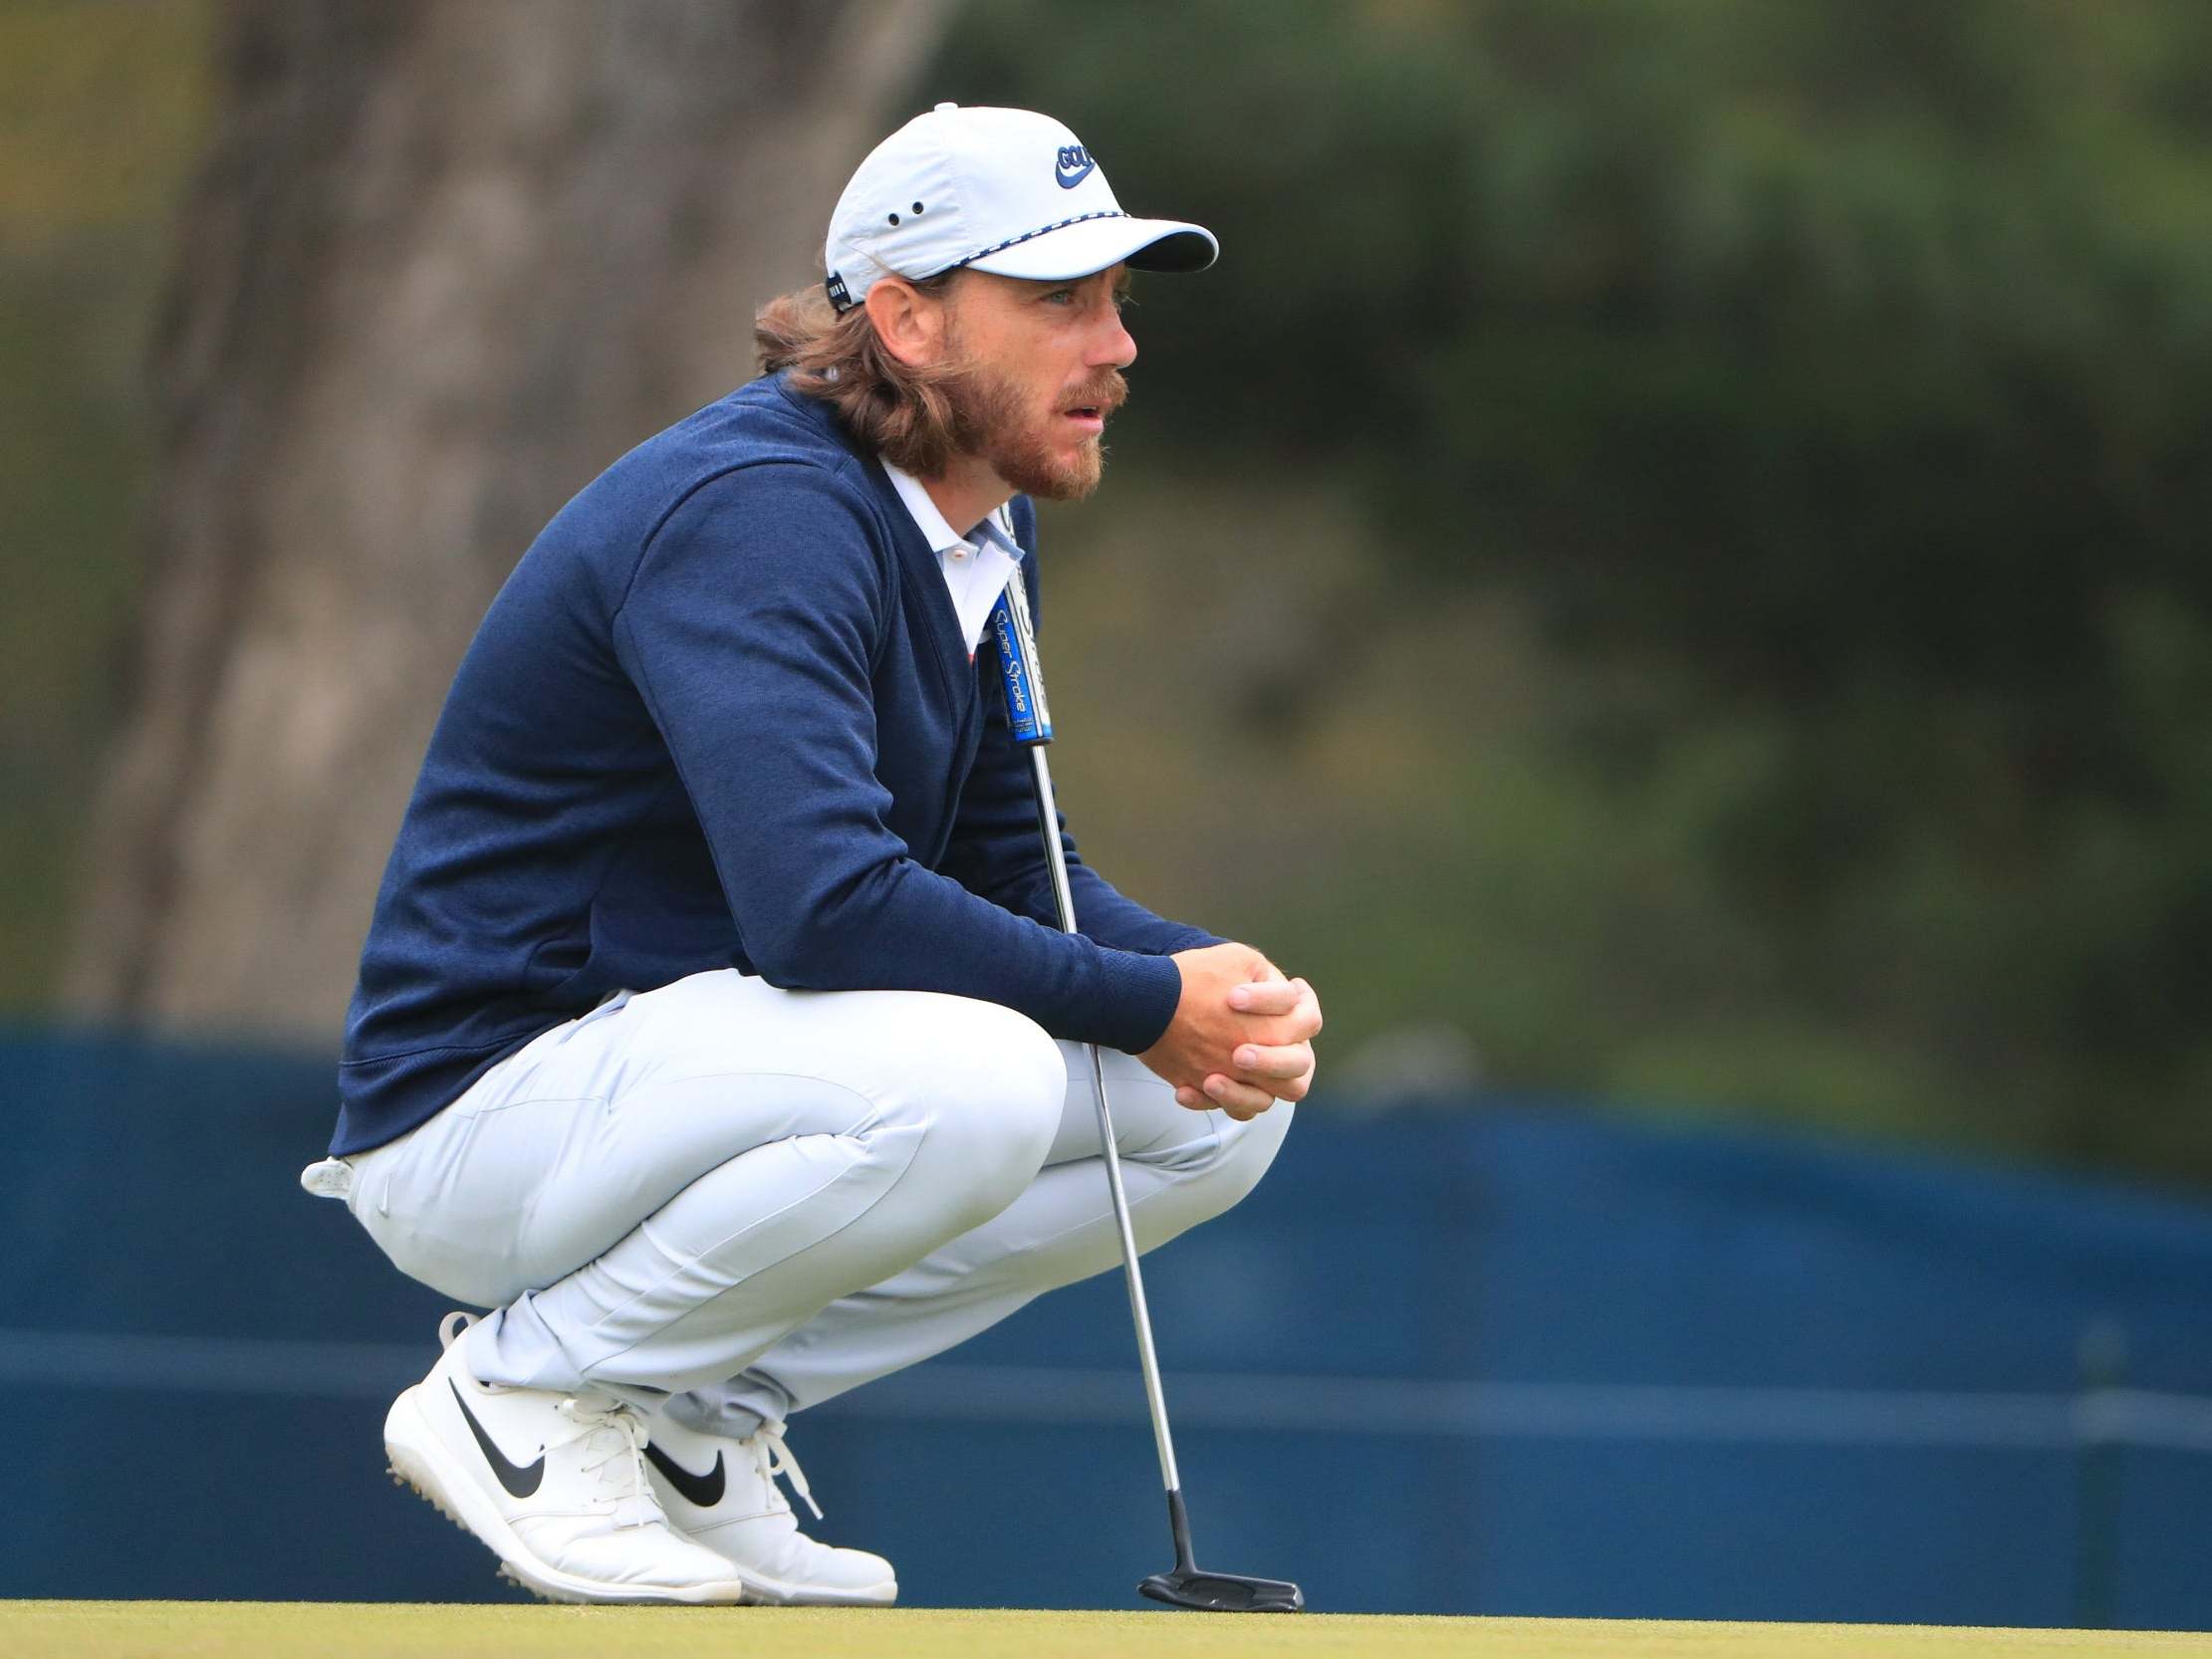 Tommy Fleetwood is three shots off the lead in a tie for seventh